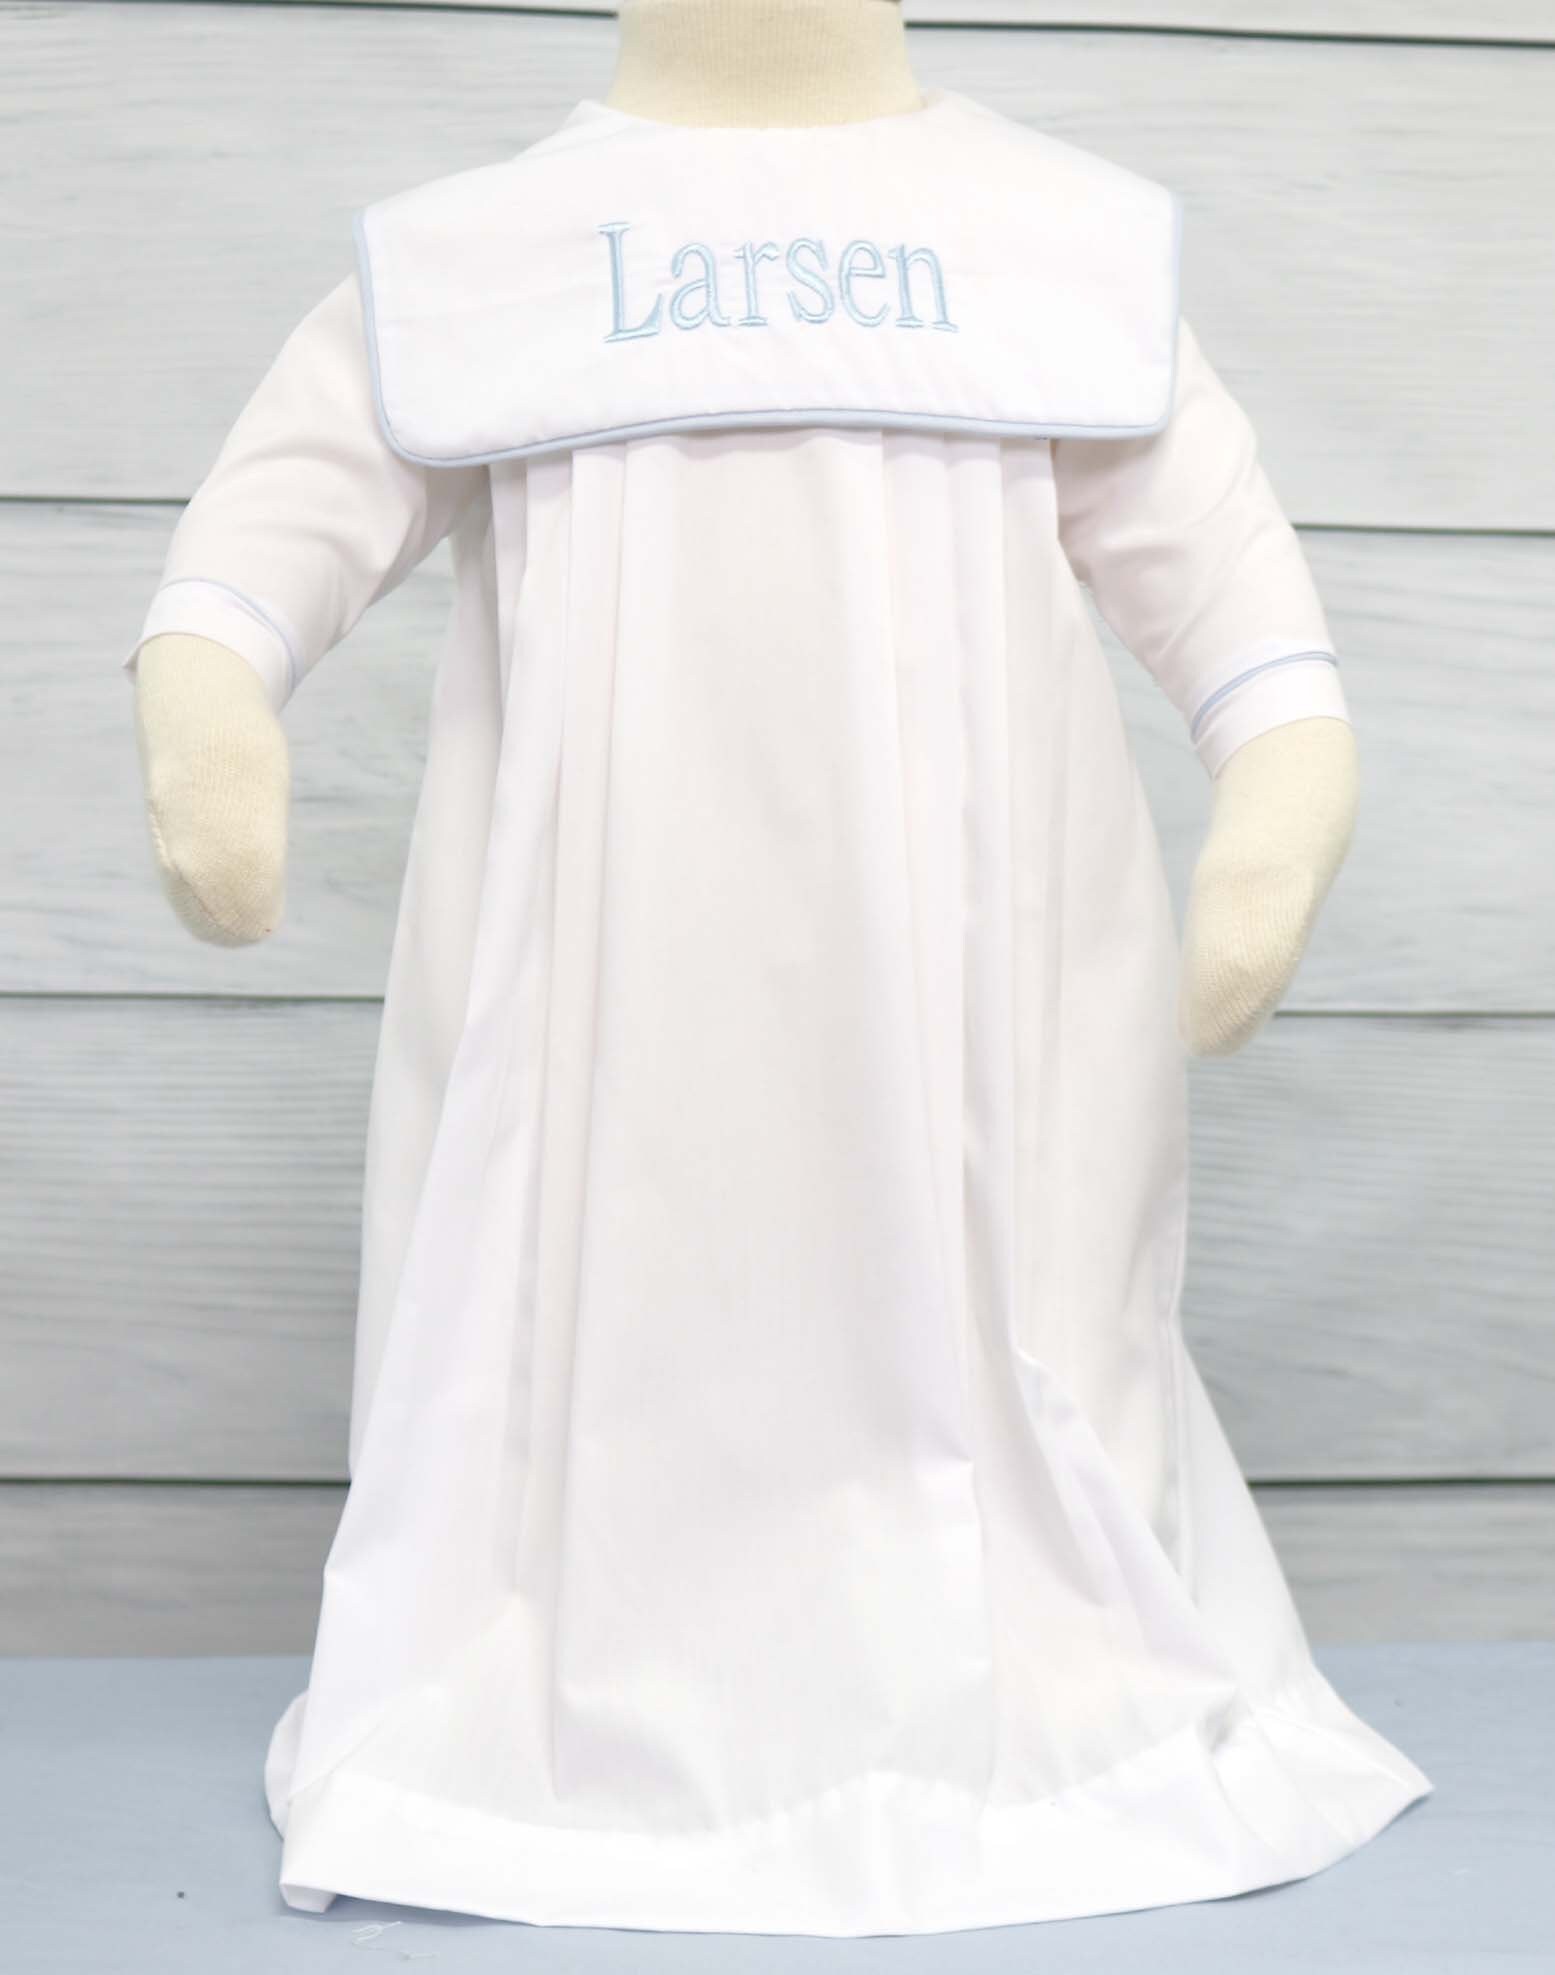 Christening Gowns Baptism Gown Boy Baptism Boy Outfit Baby | Etsy